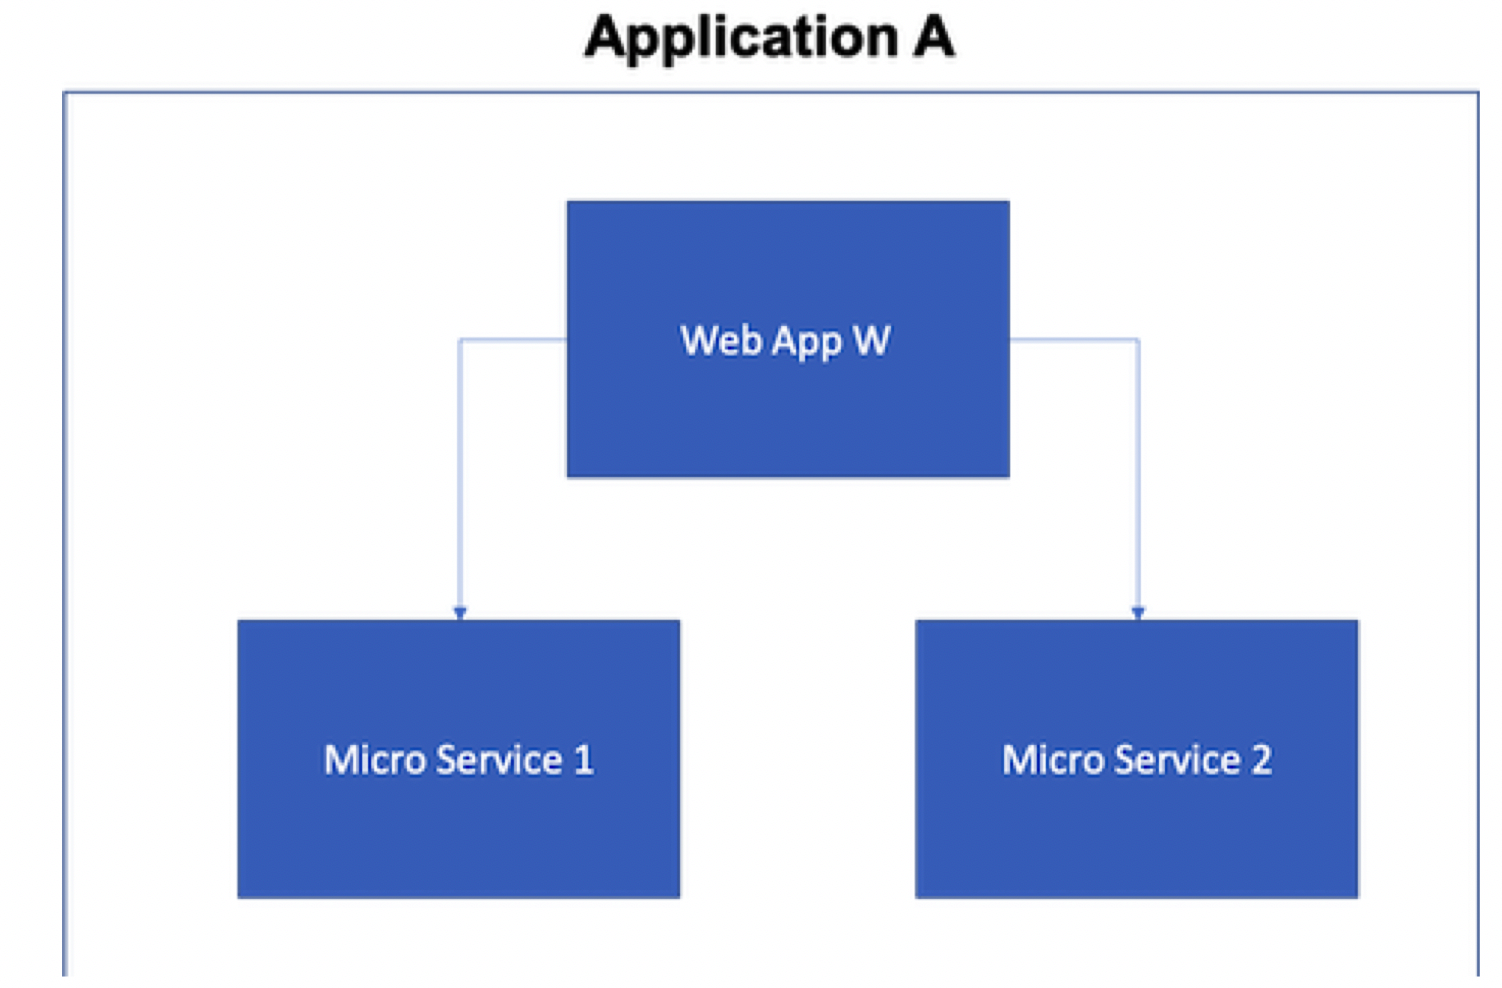 Architecture of a simple cloud-native application